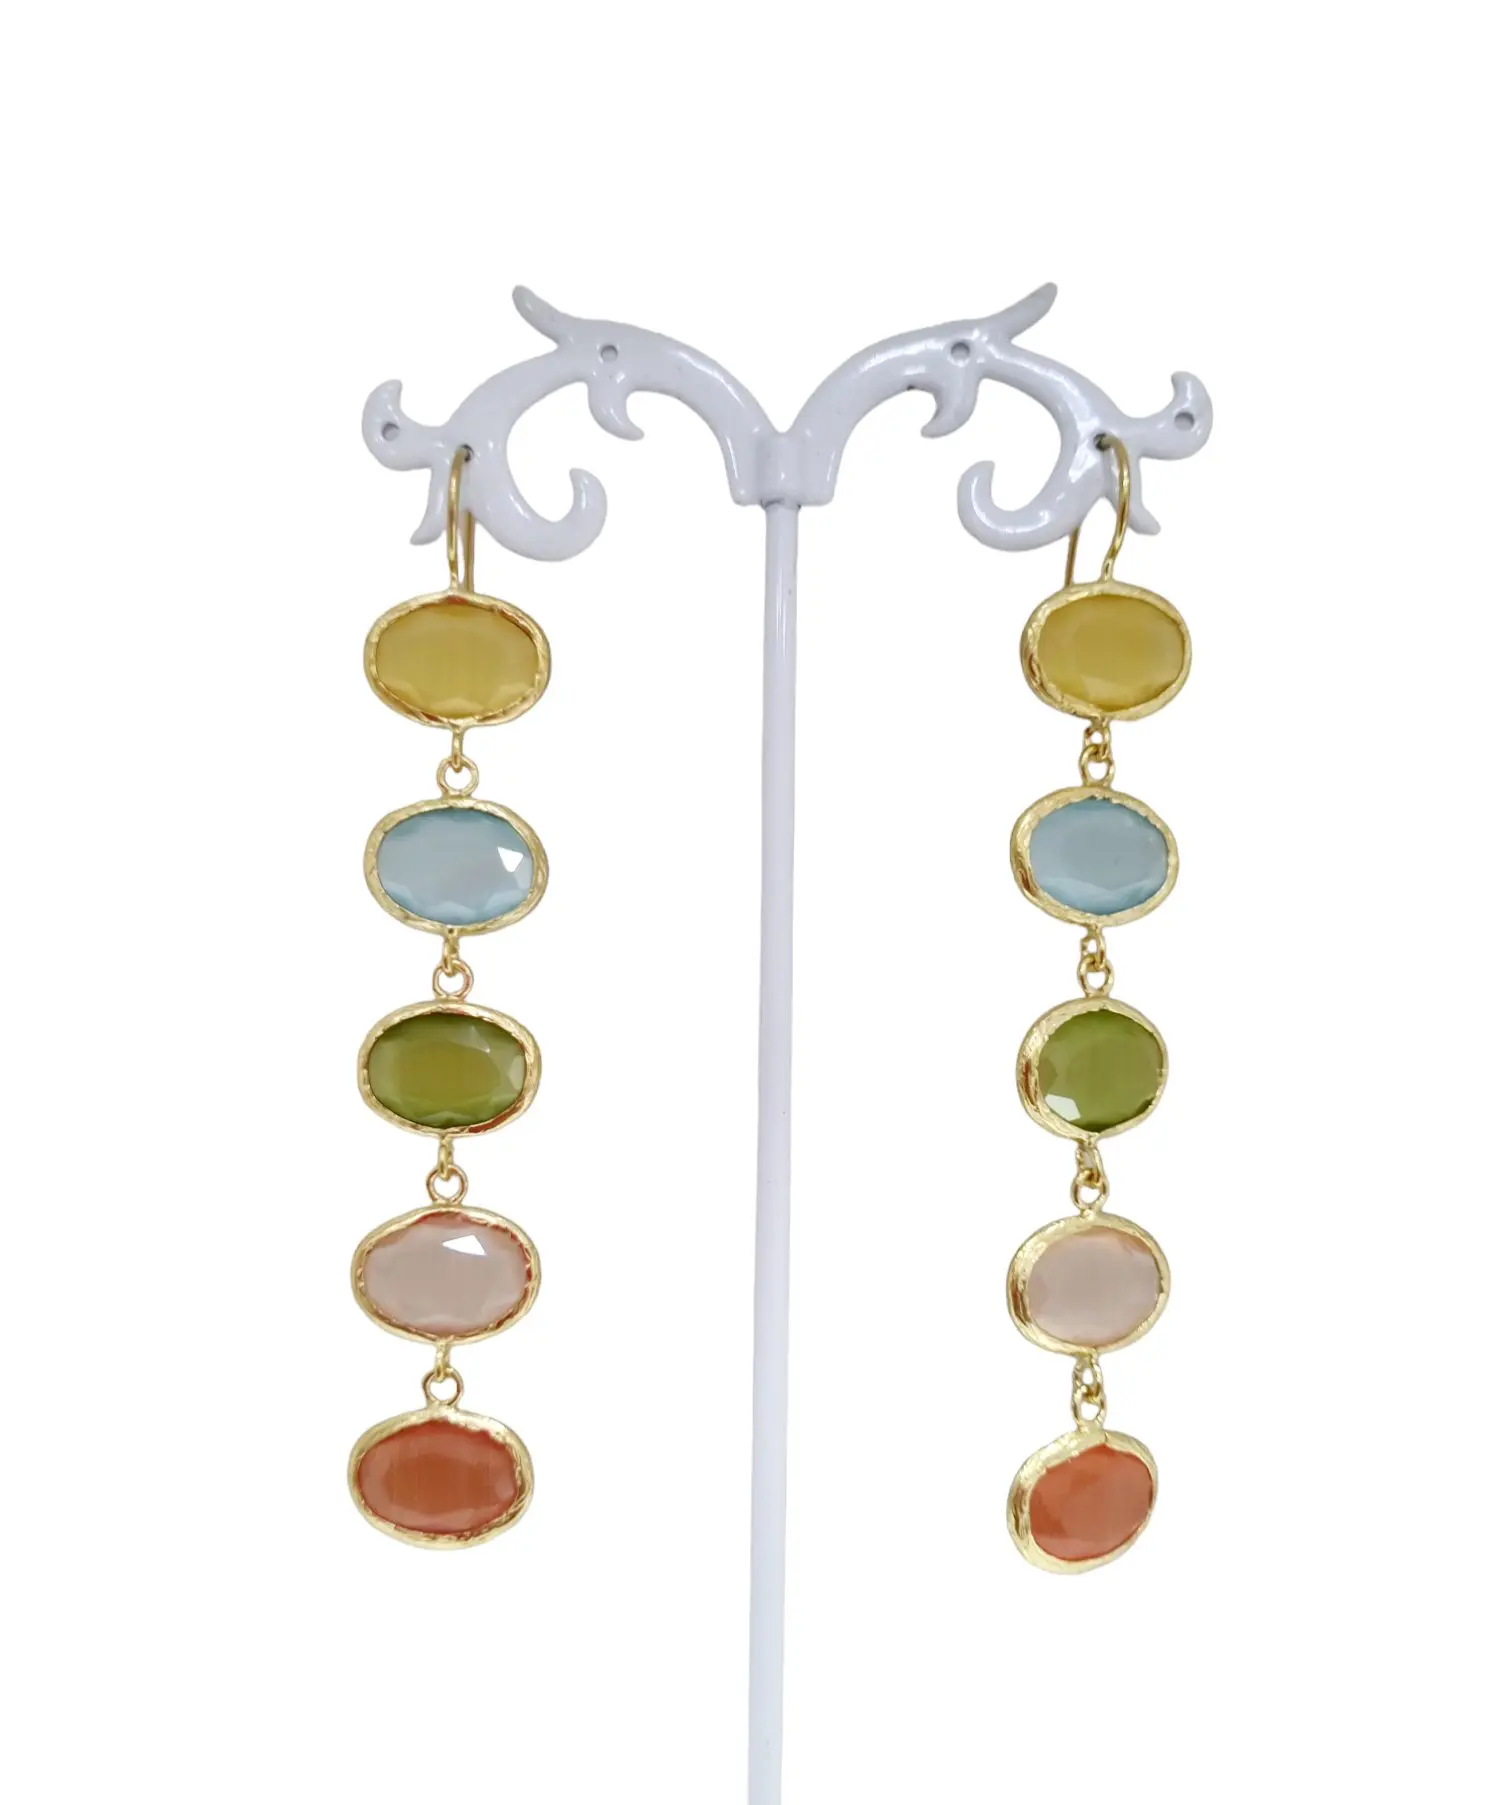 Earrings made with cat's eye in various pastel colors surrounded by brass Weight 6.4g Length 9cm